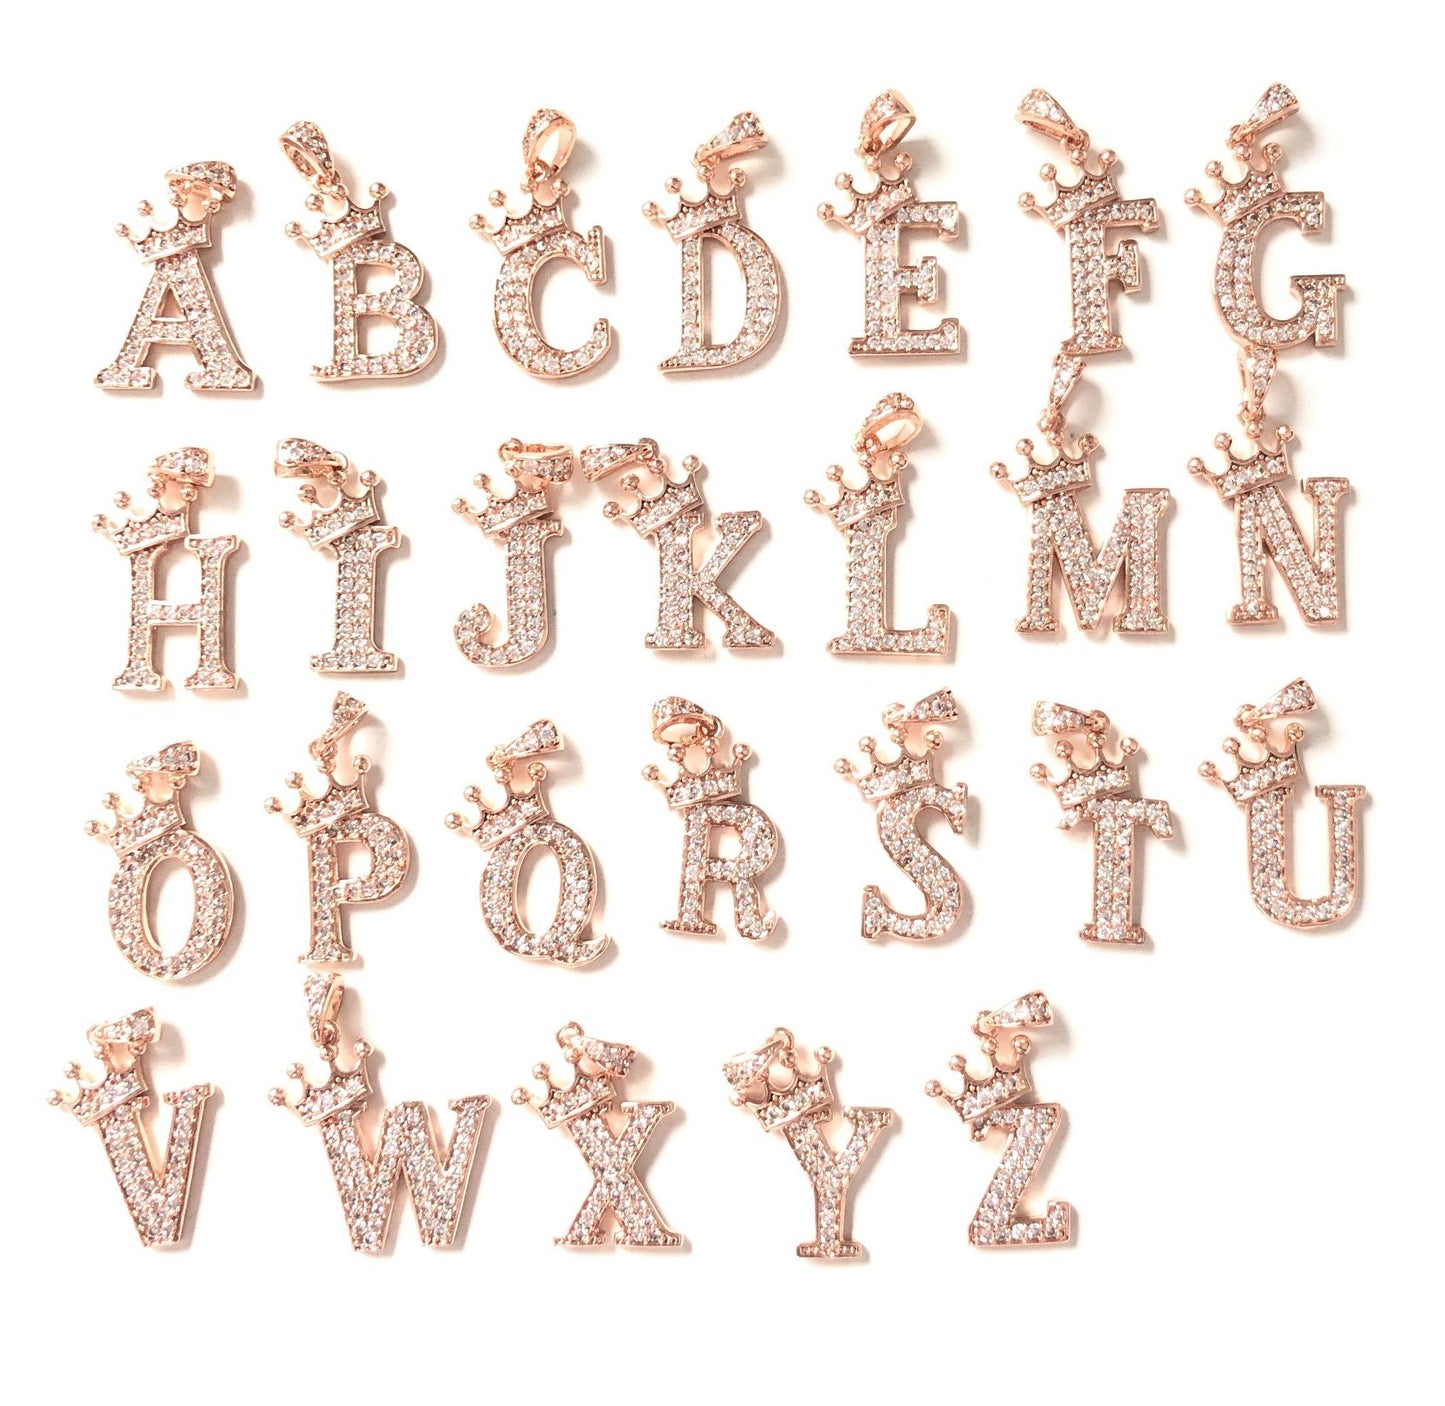 26pcs/lot 20mm CZ Paved Crown Initial Letter Alphabet Charms Rose Gold, 26pcs from A to Z CZ Paved Charms Initials & Numbers Charms Beads Beyond